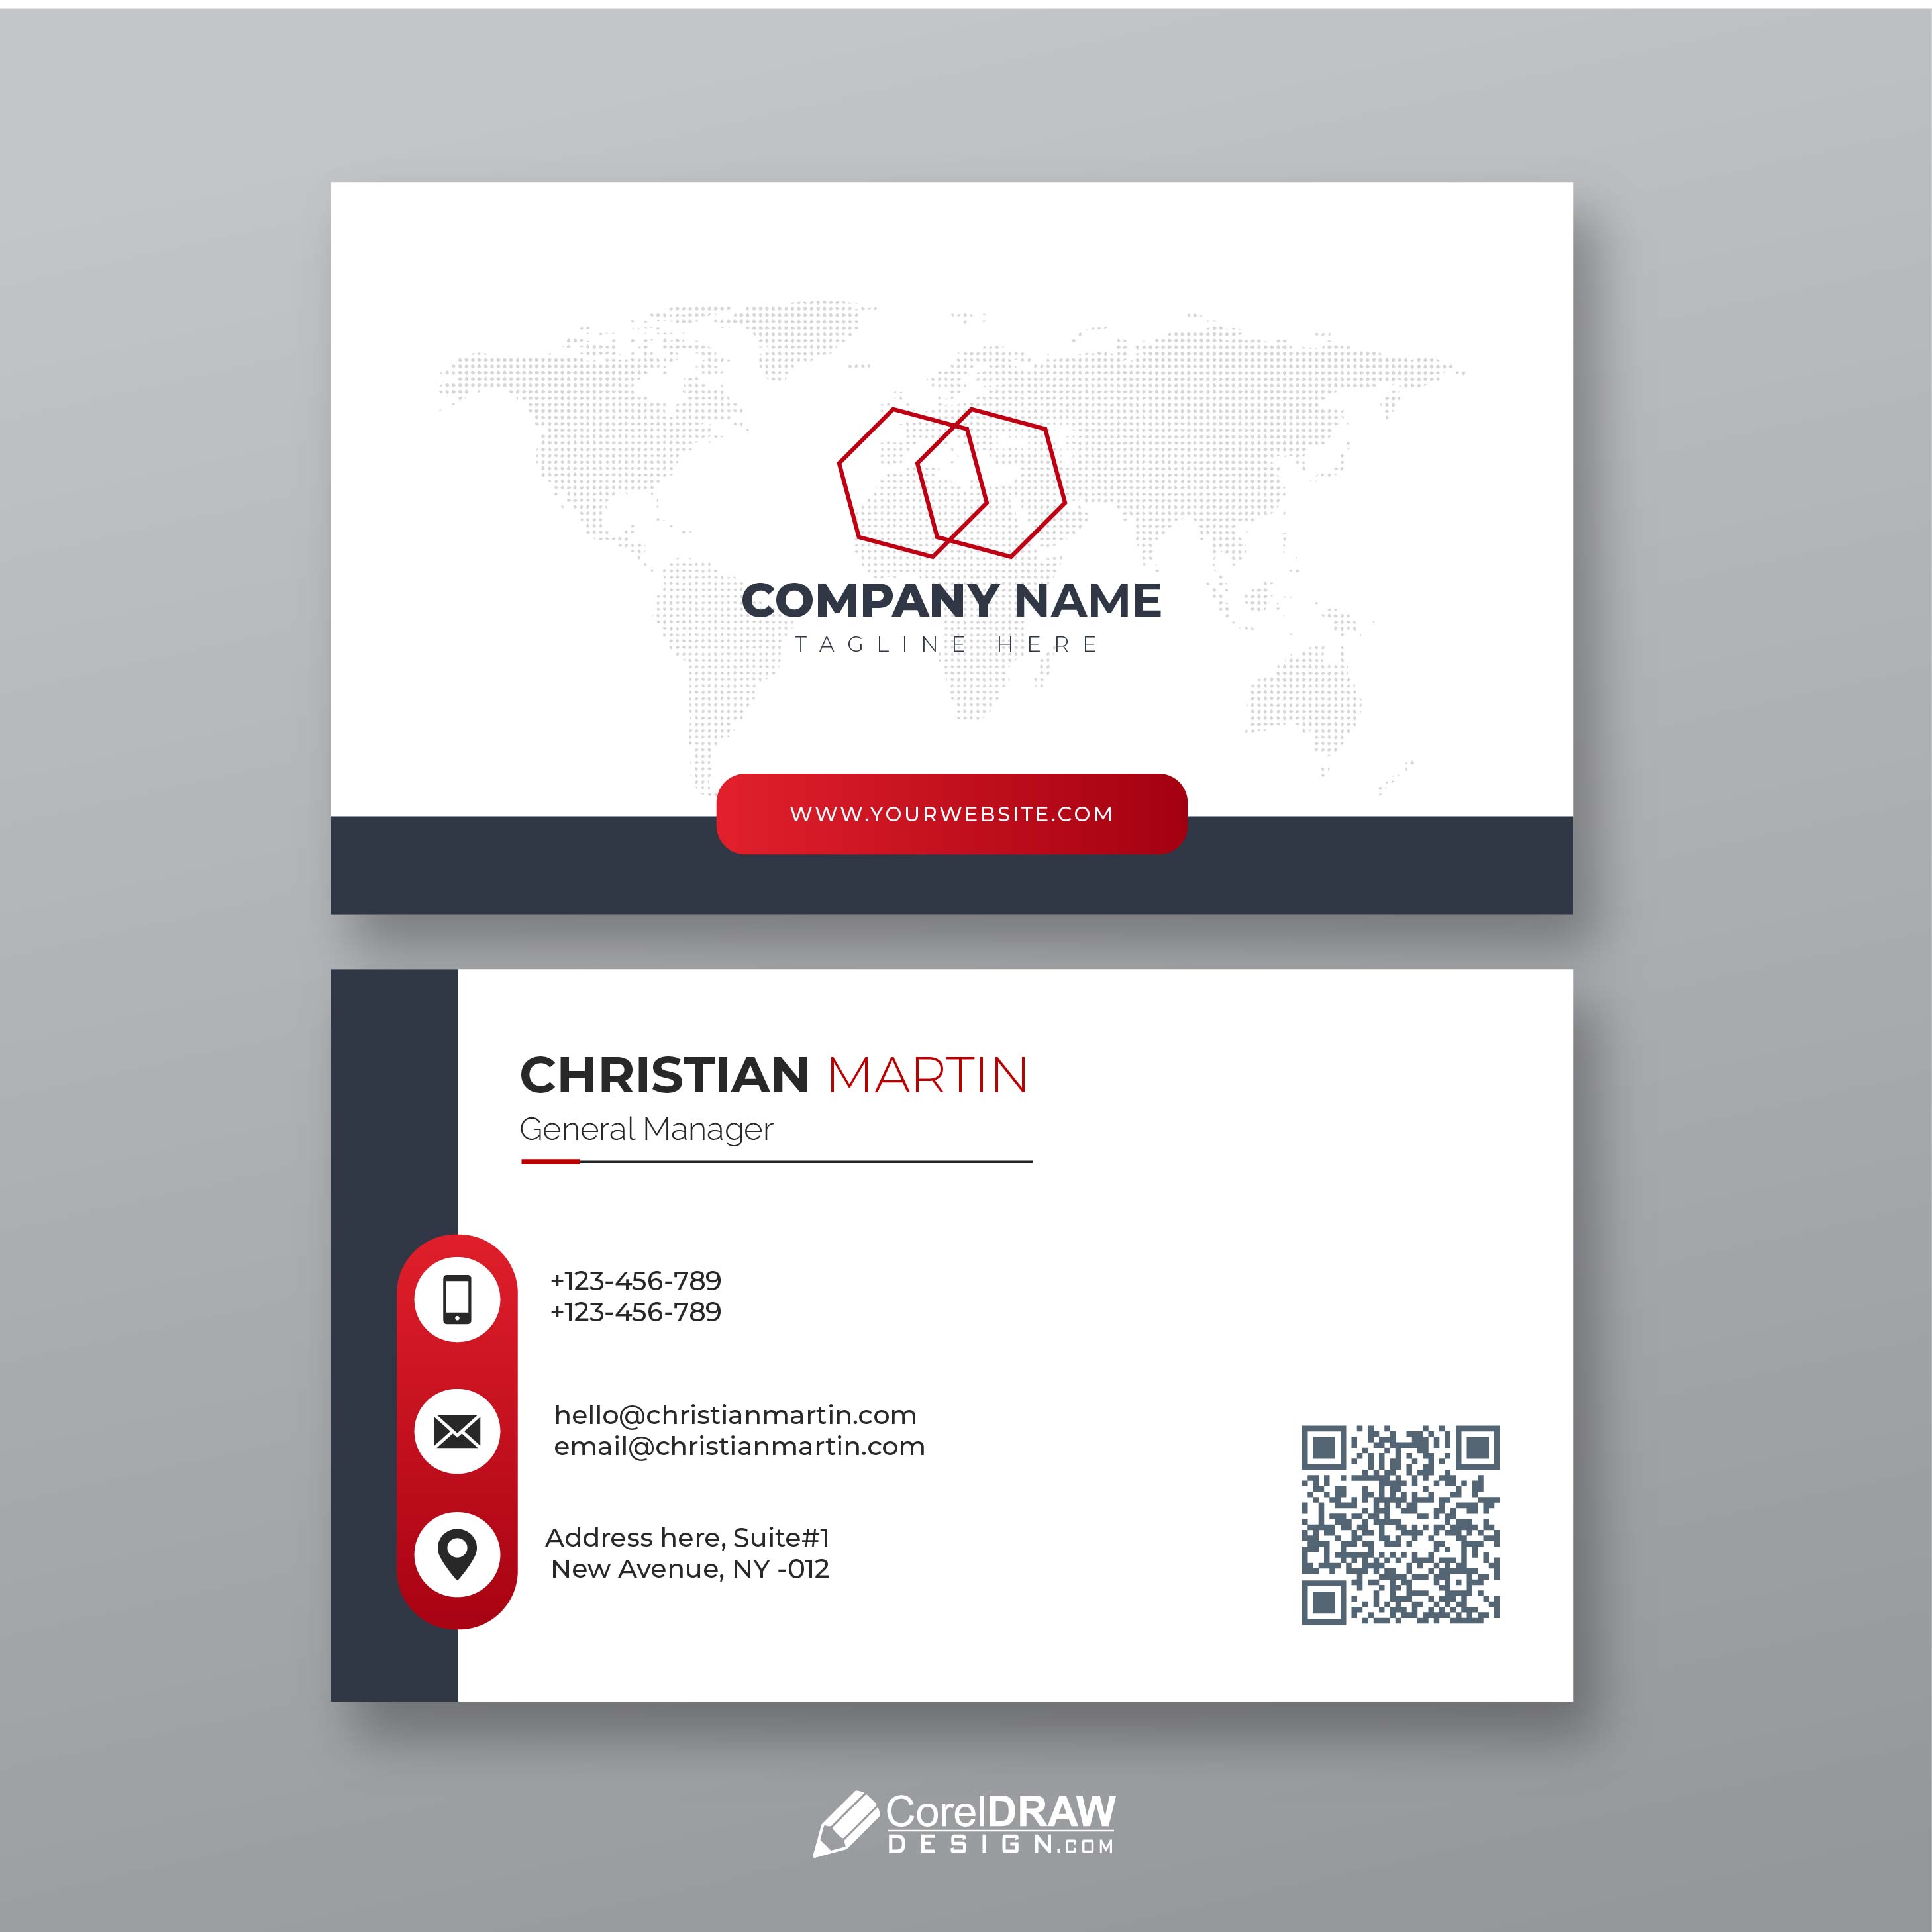 Elegant Red Gradient Corporate Business Card Template